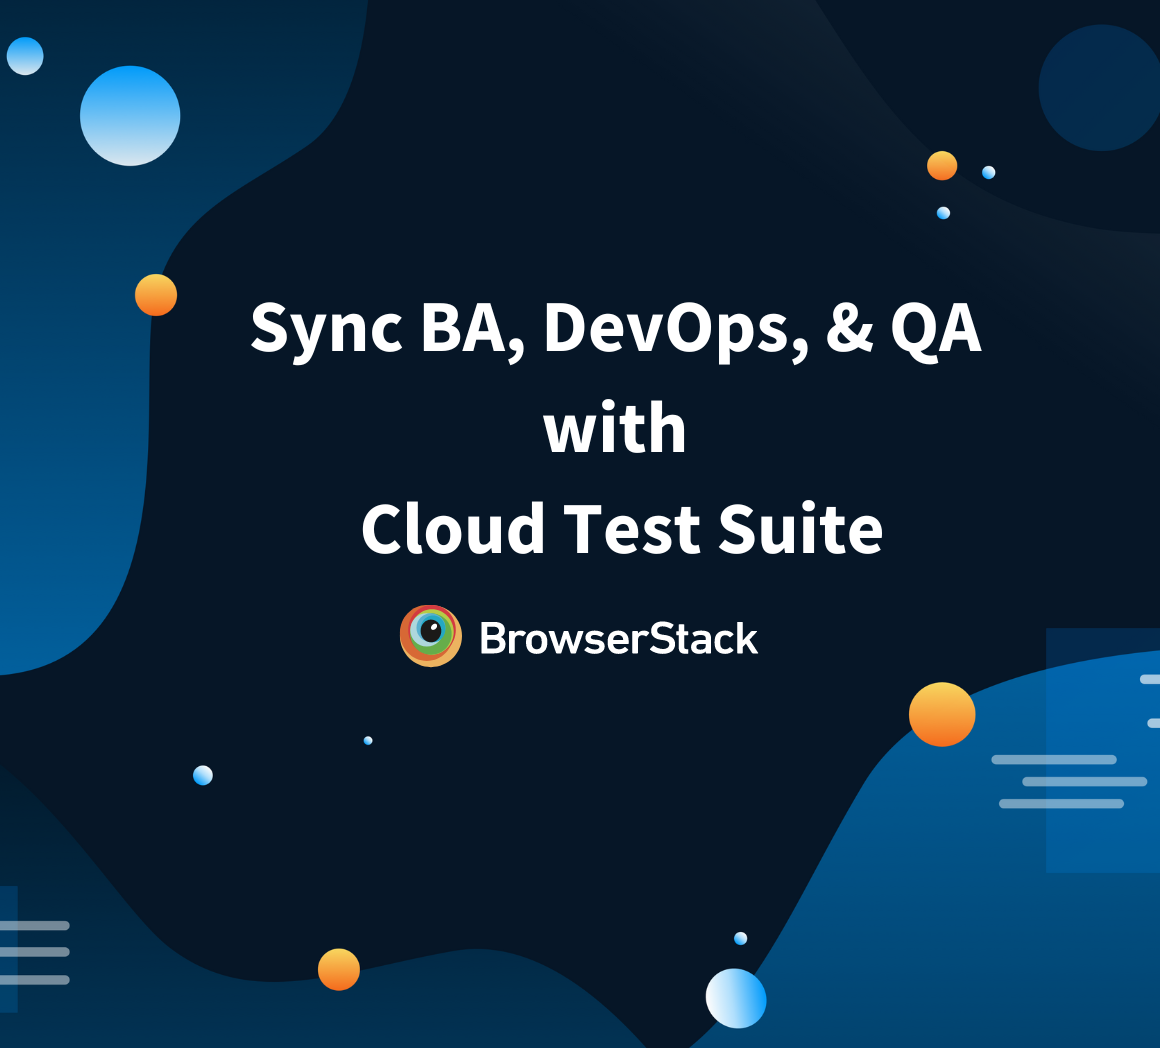 Synchronize BA, DevOps, and QA with Cloud Test Suite